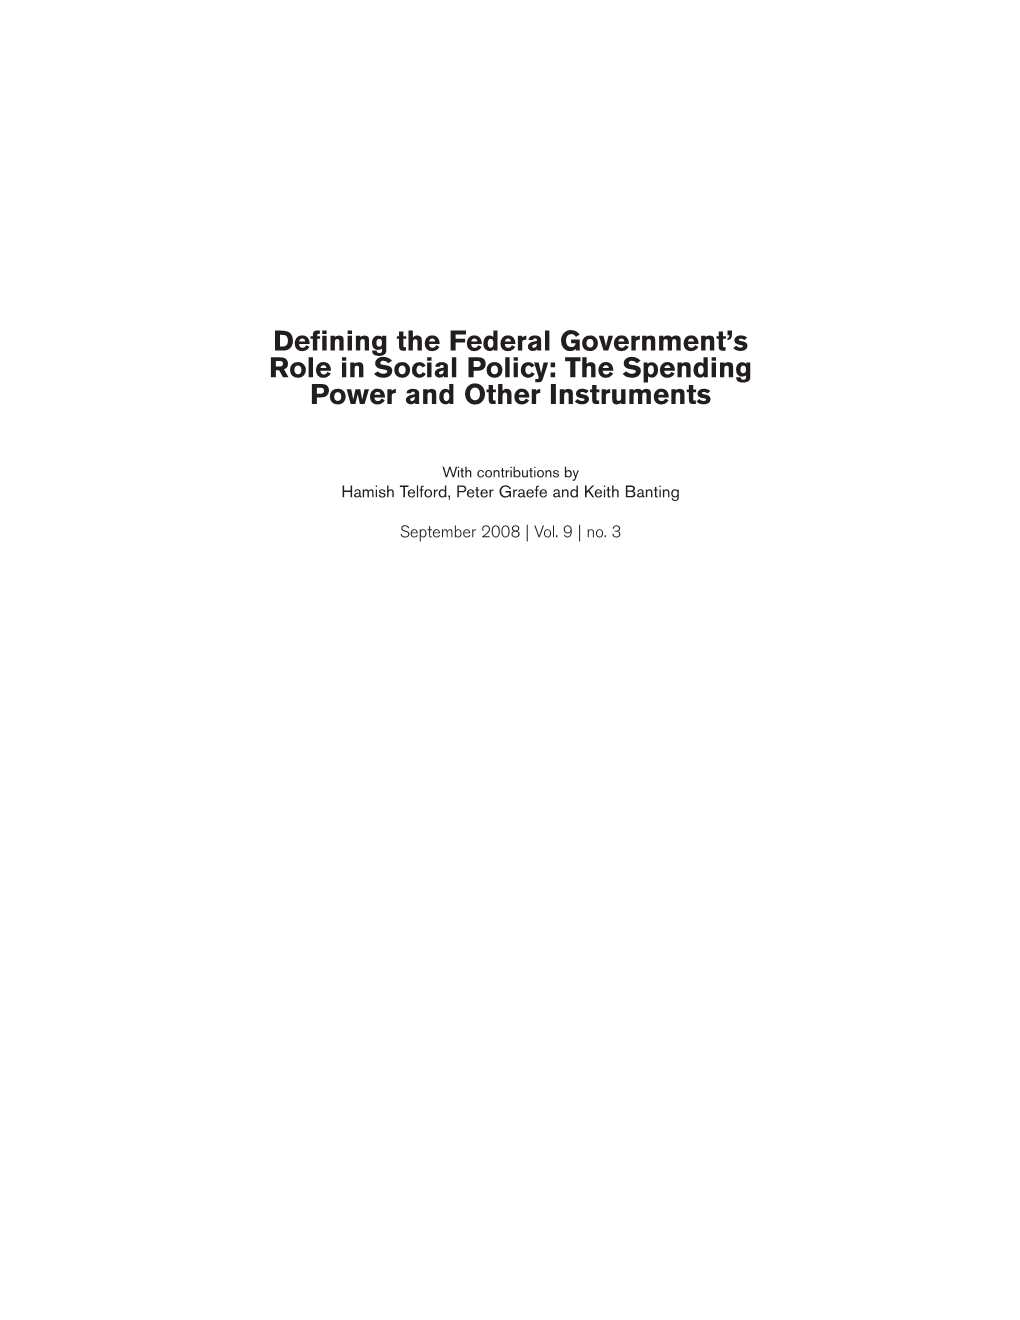 Defining the Federal Government's Role in Social Policy: the Spending